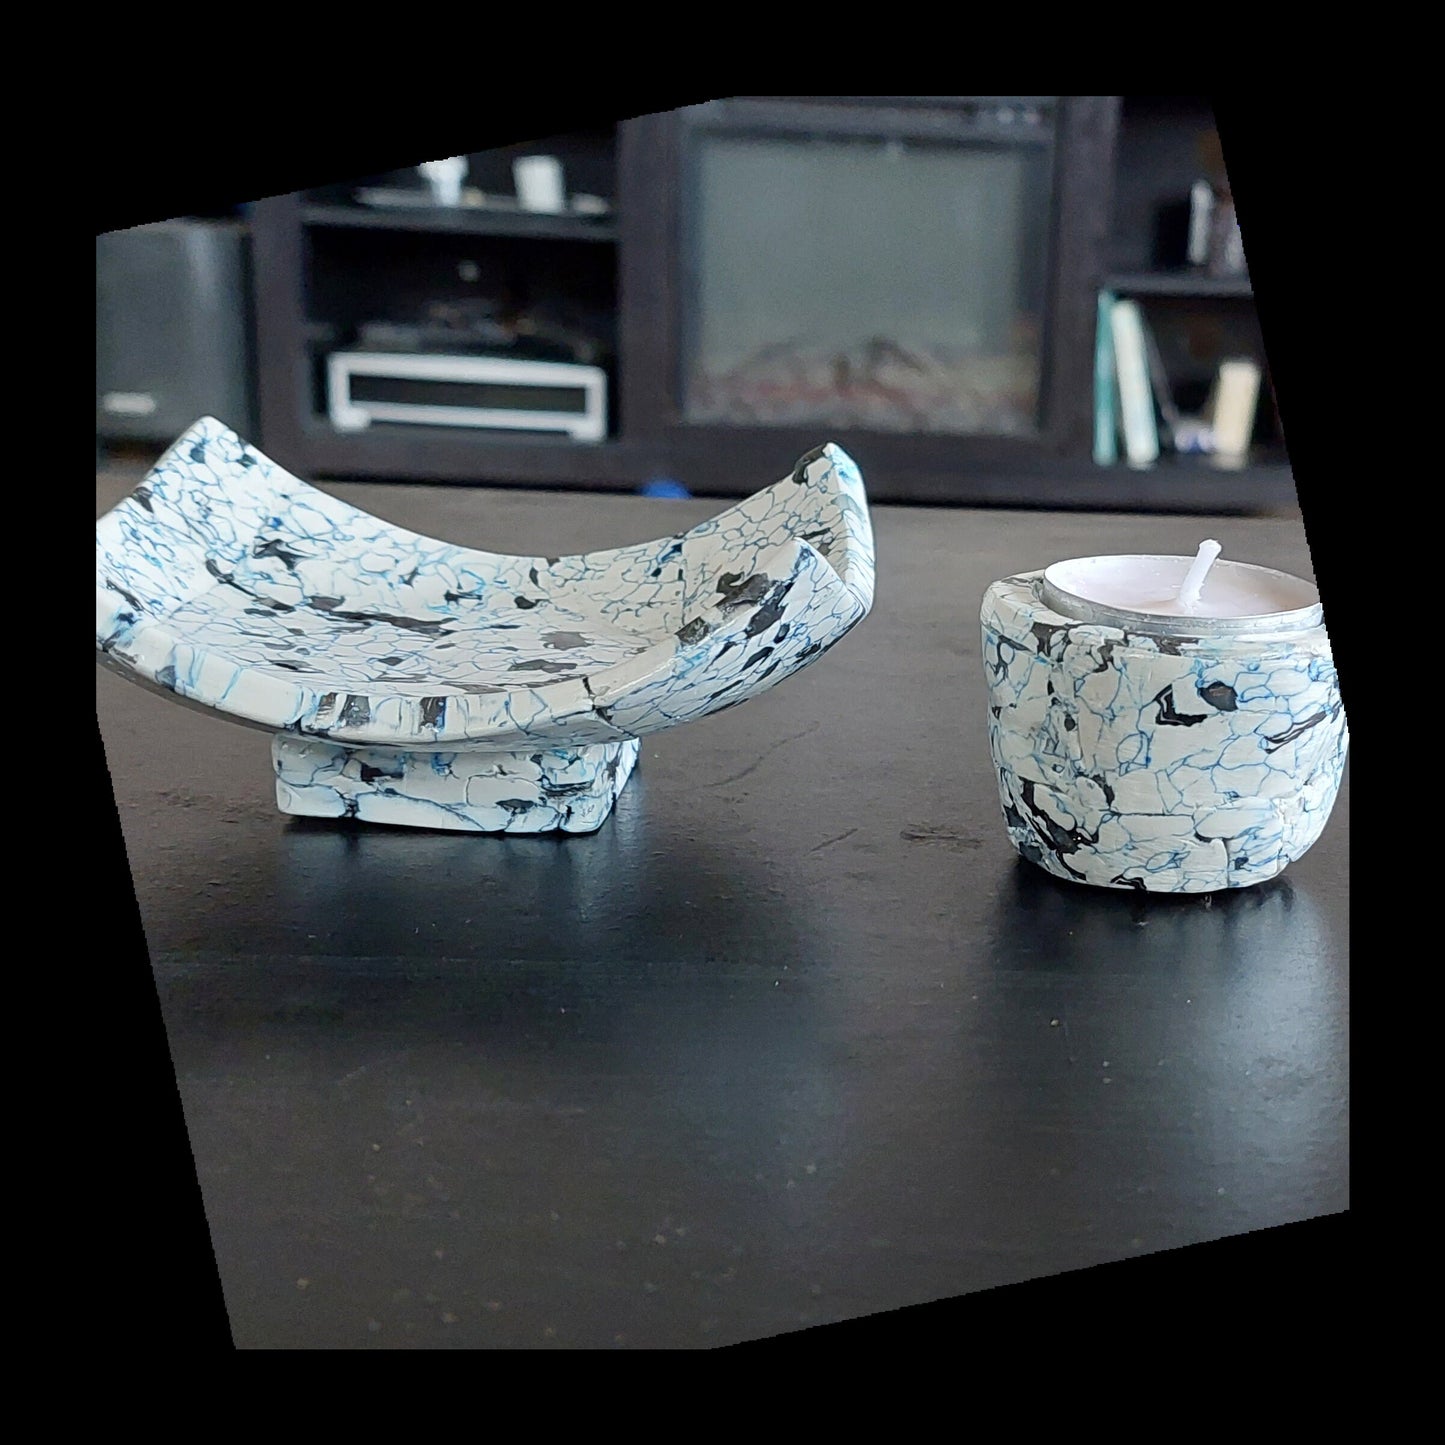 Modern-esque Handcrafted Home Decor Dish and Tealight Candle Holder Gift Set